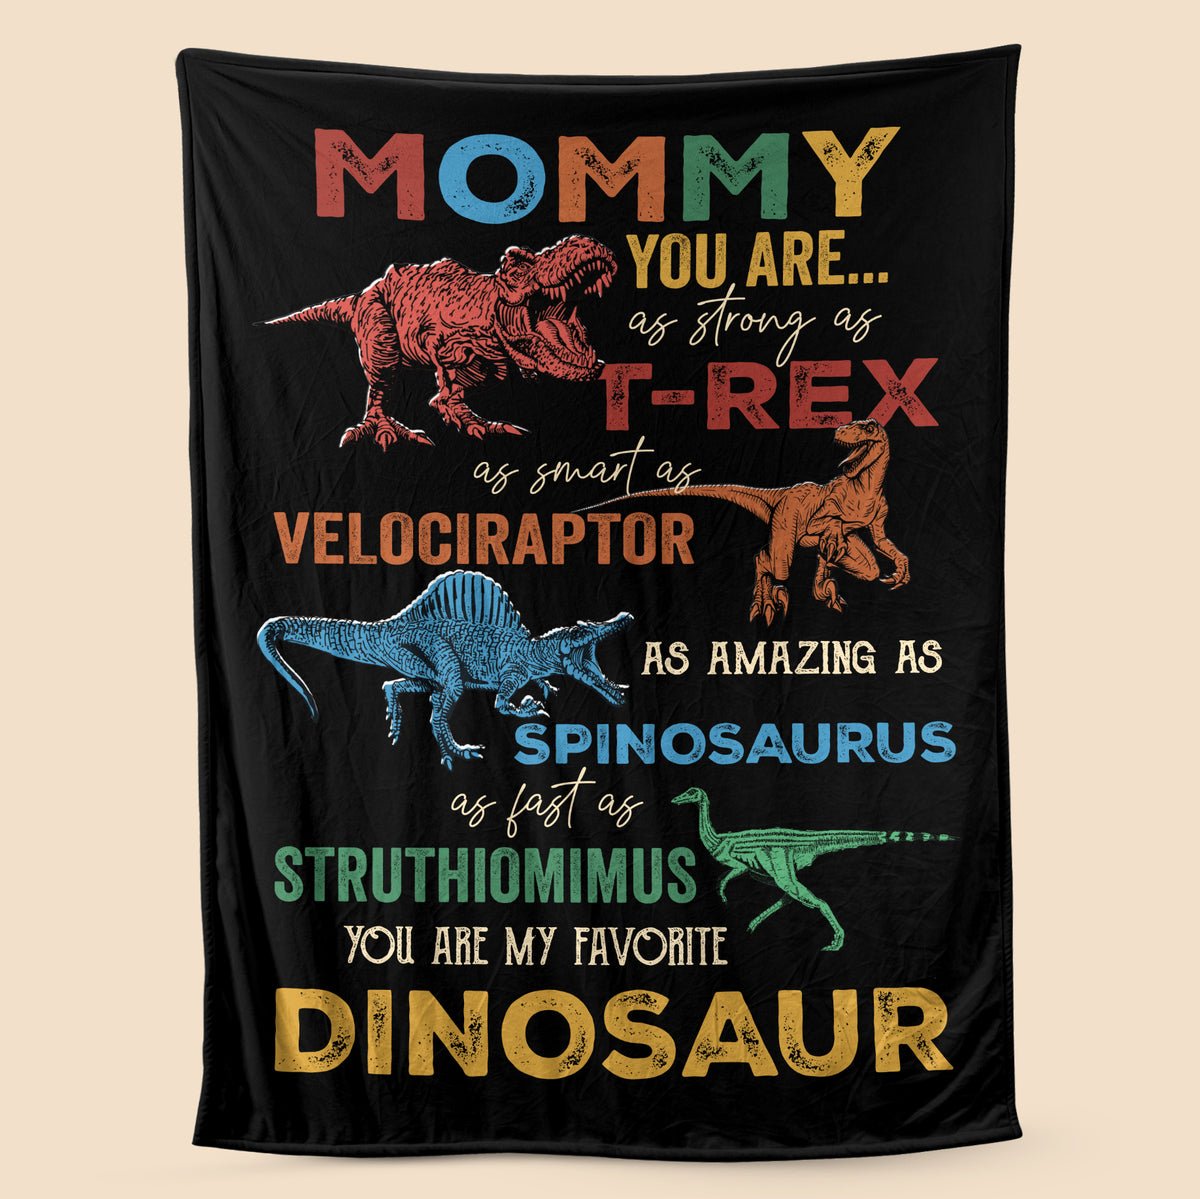 Mommy - You Are My Favorite Dinosaur Blanket - Best Gift For Mother - Giftago